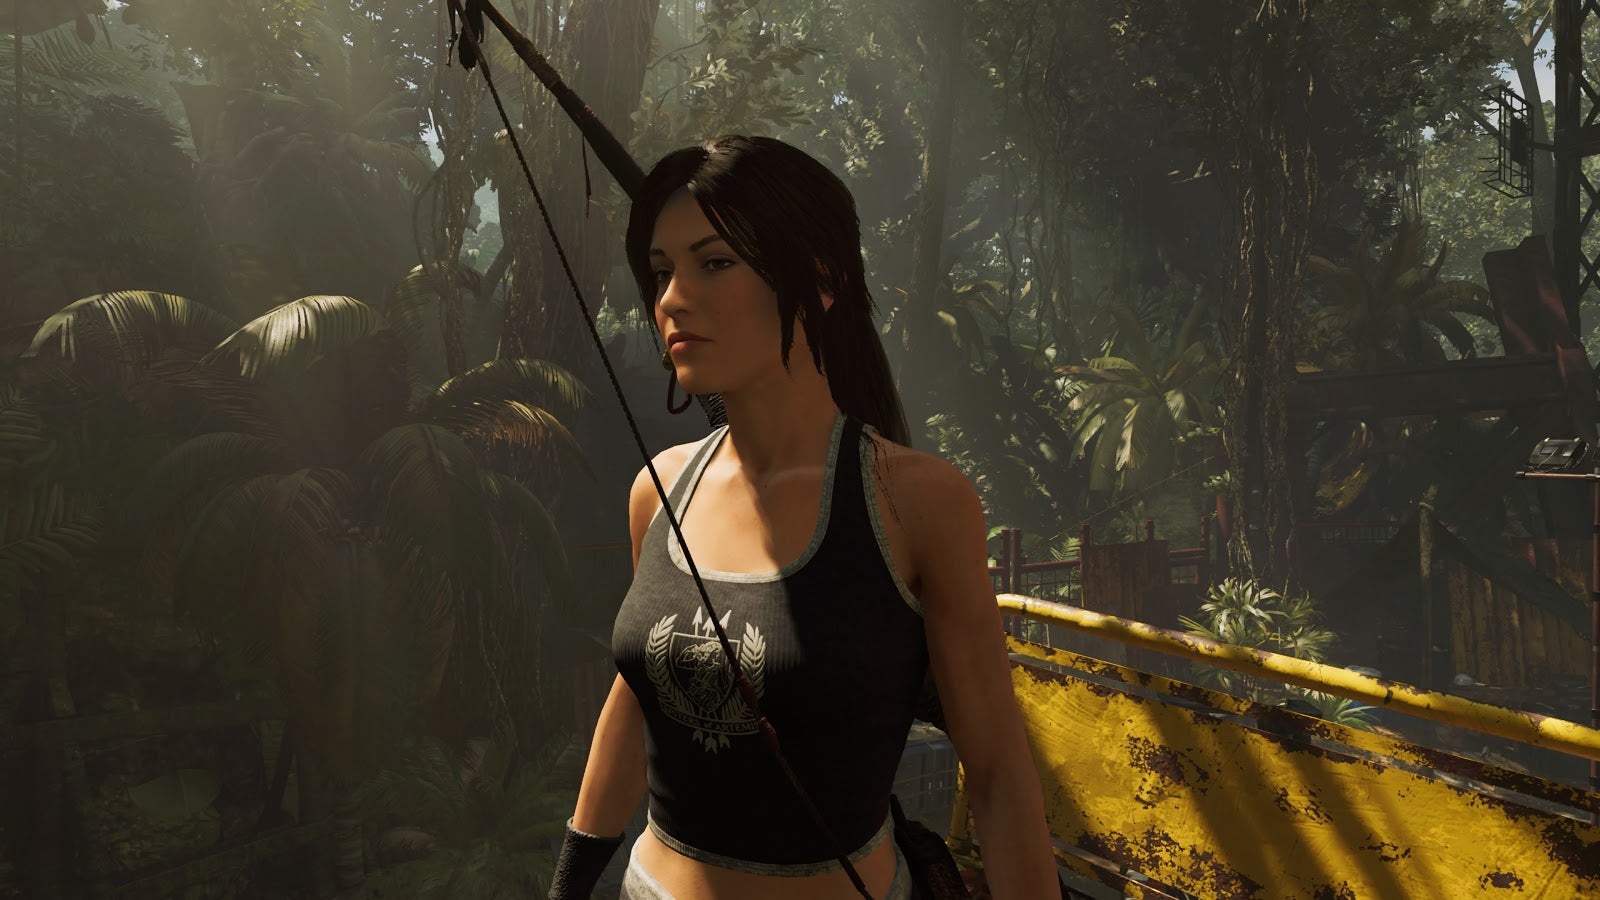 Shadow Of The Tomb Raider Fandom’s Quest For An 8th DLC Ends With A Whimper